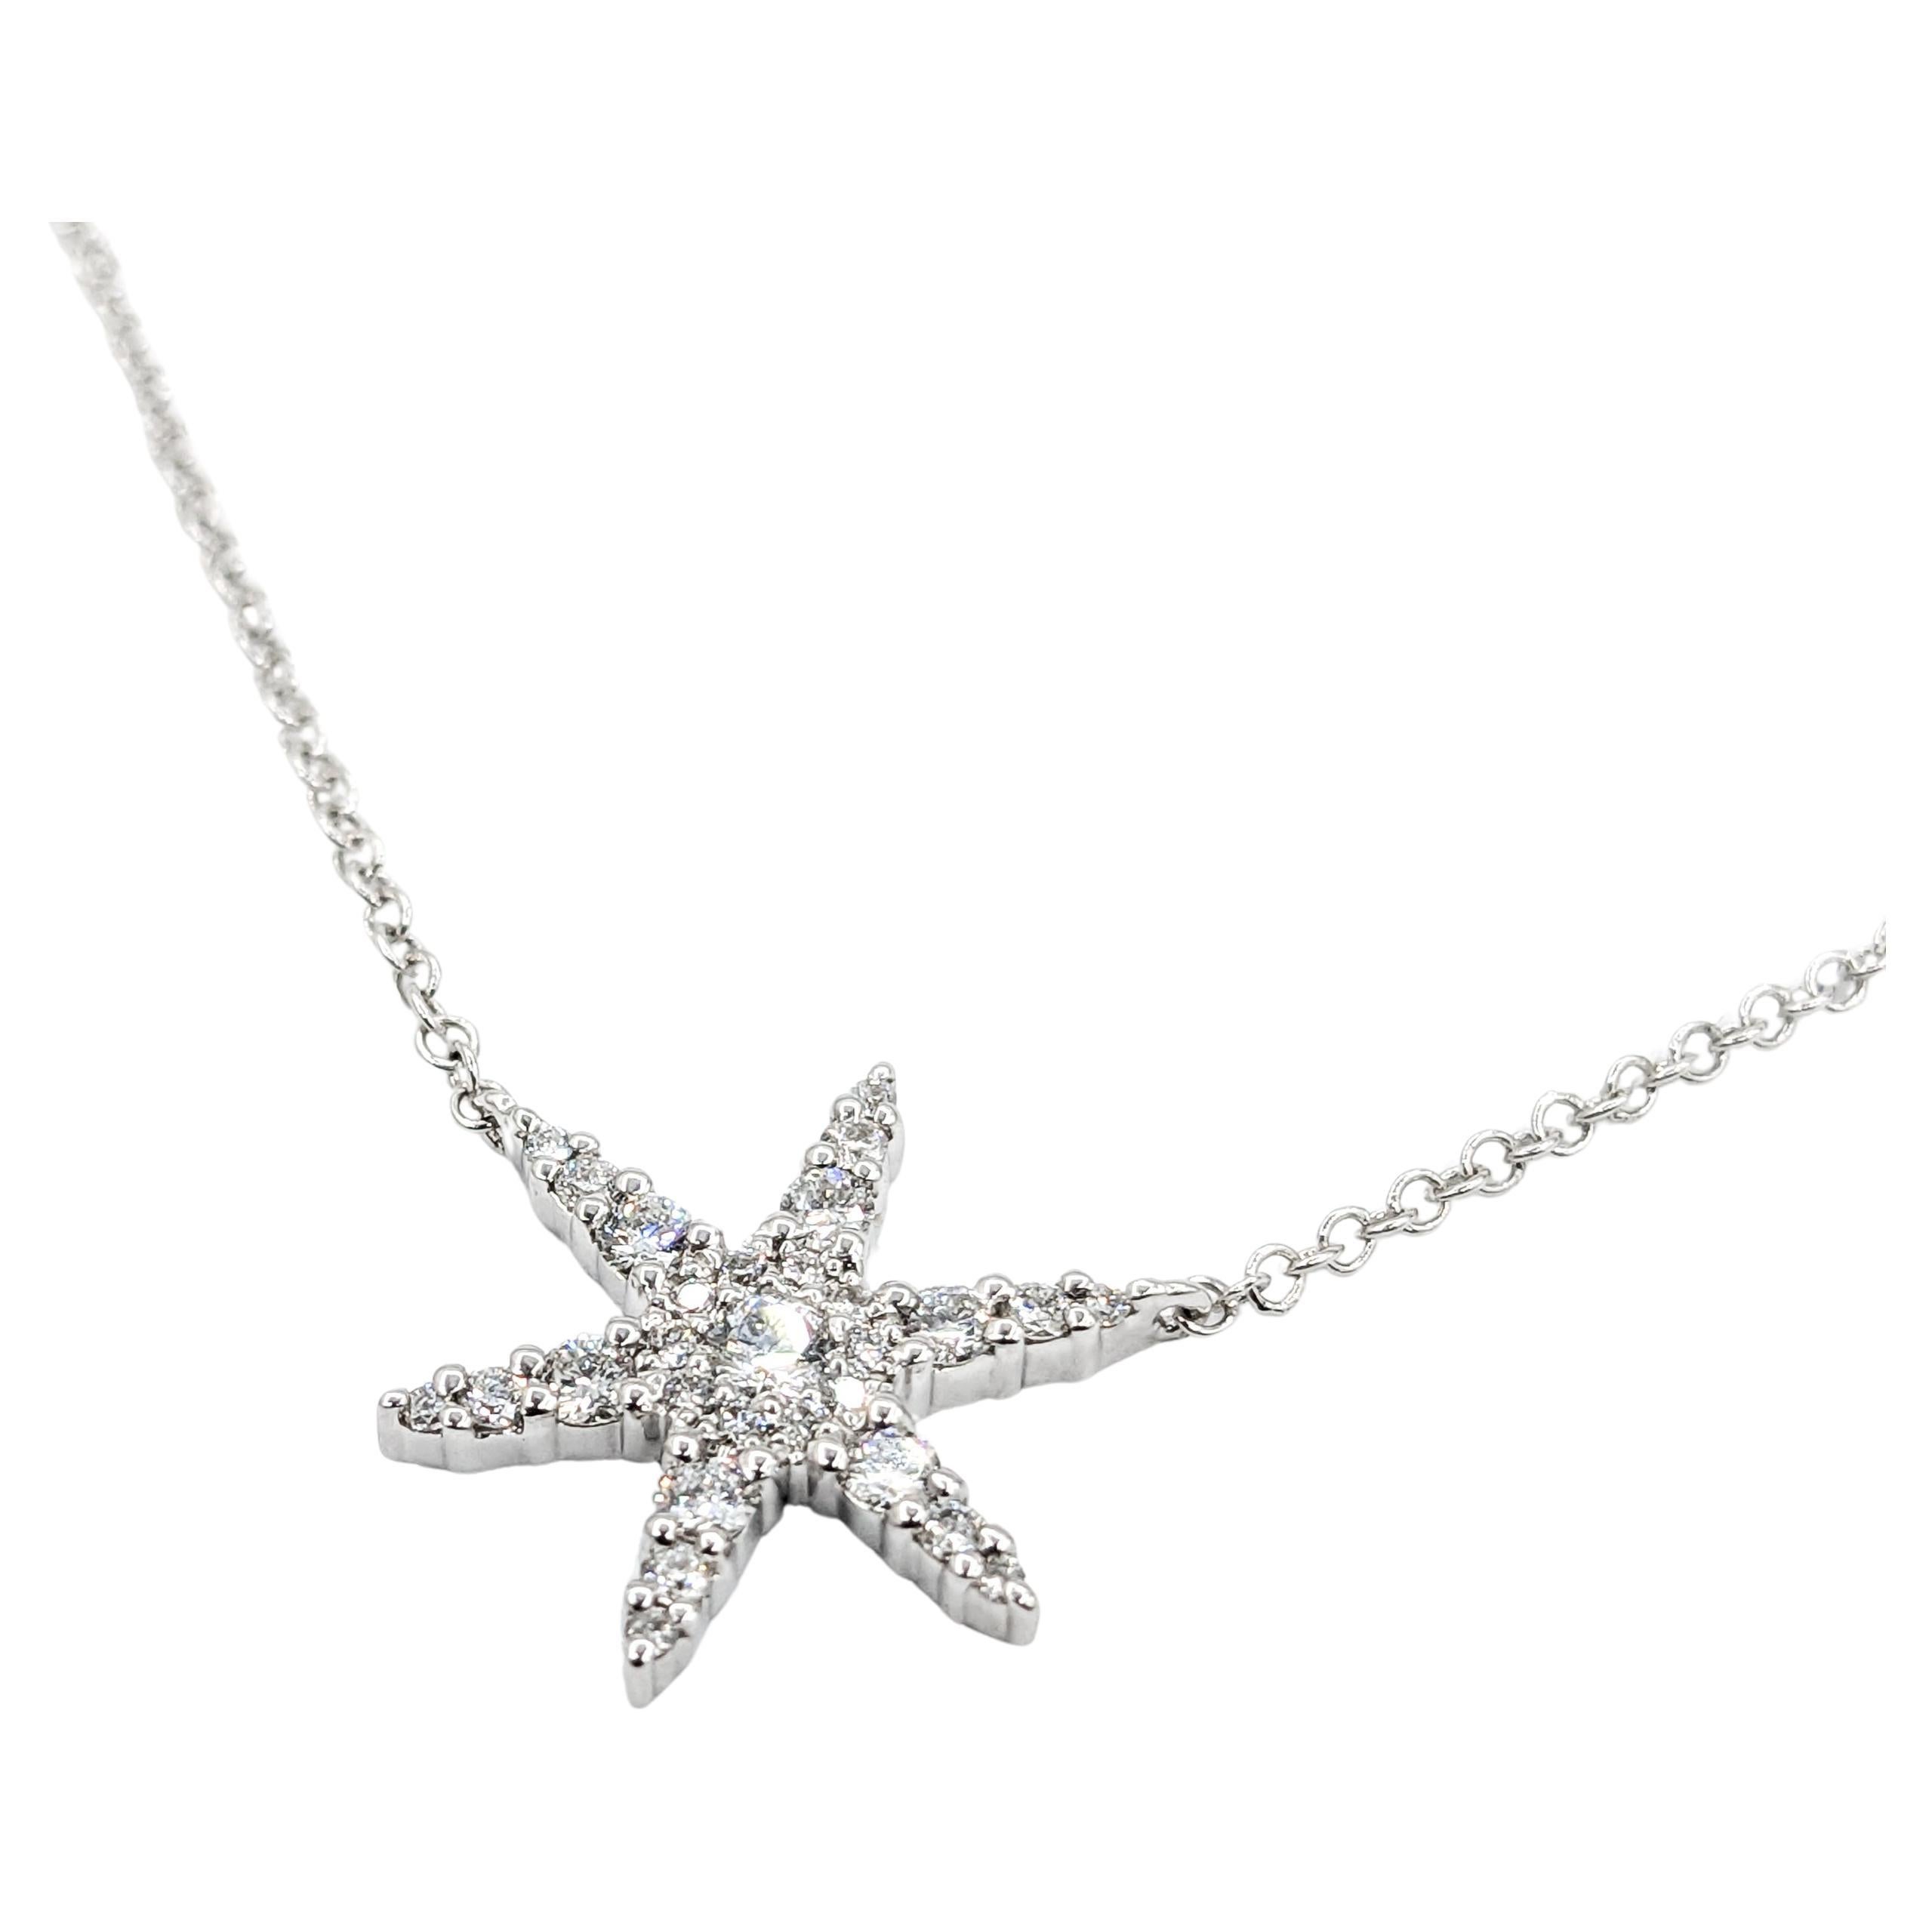 Diamond Star Necklace in White Gold

Introducing our exquisite necklace, delicately crafted in 14kt white gold and featuring a dazzling star pendant with 0.24ctw diamonds. These sparkling diamonds have an SI clarity and a near colorless quality,